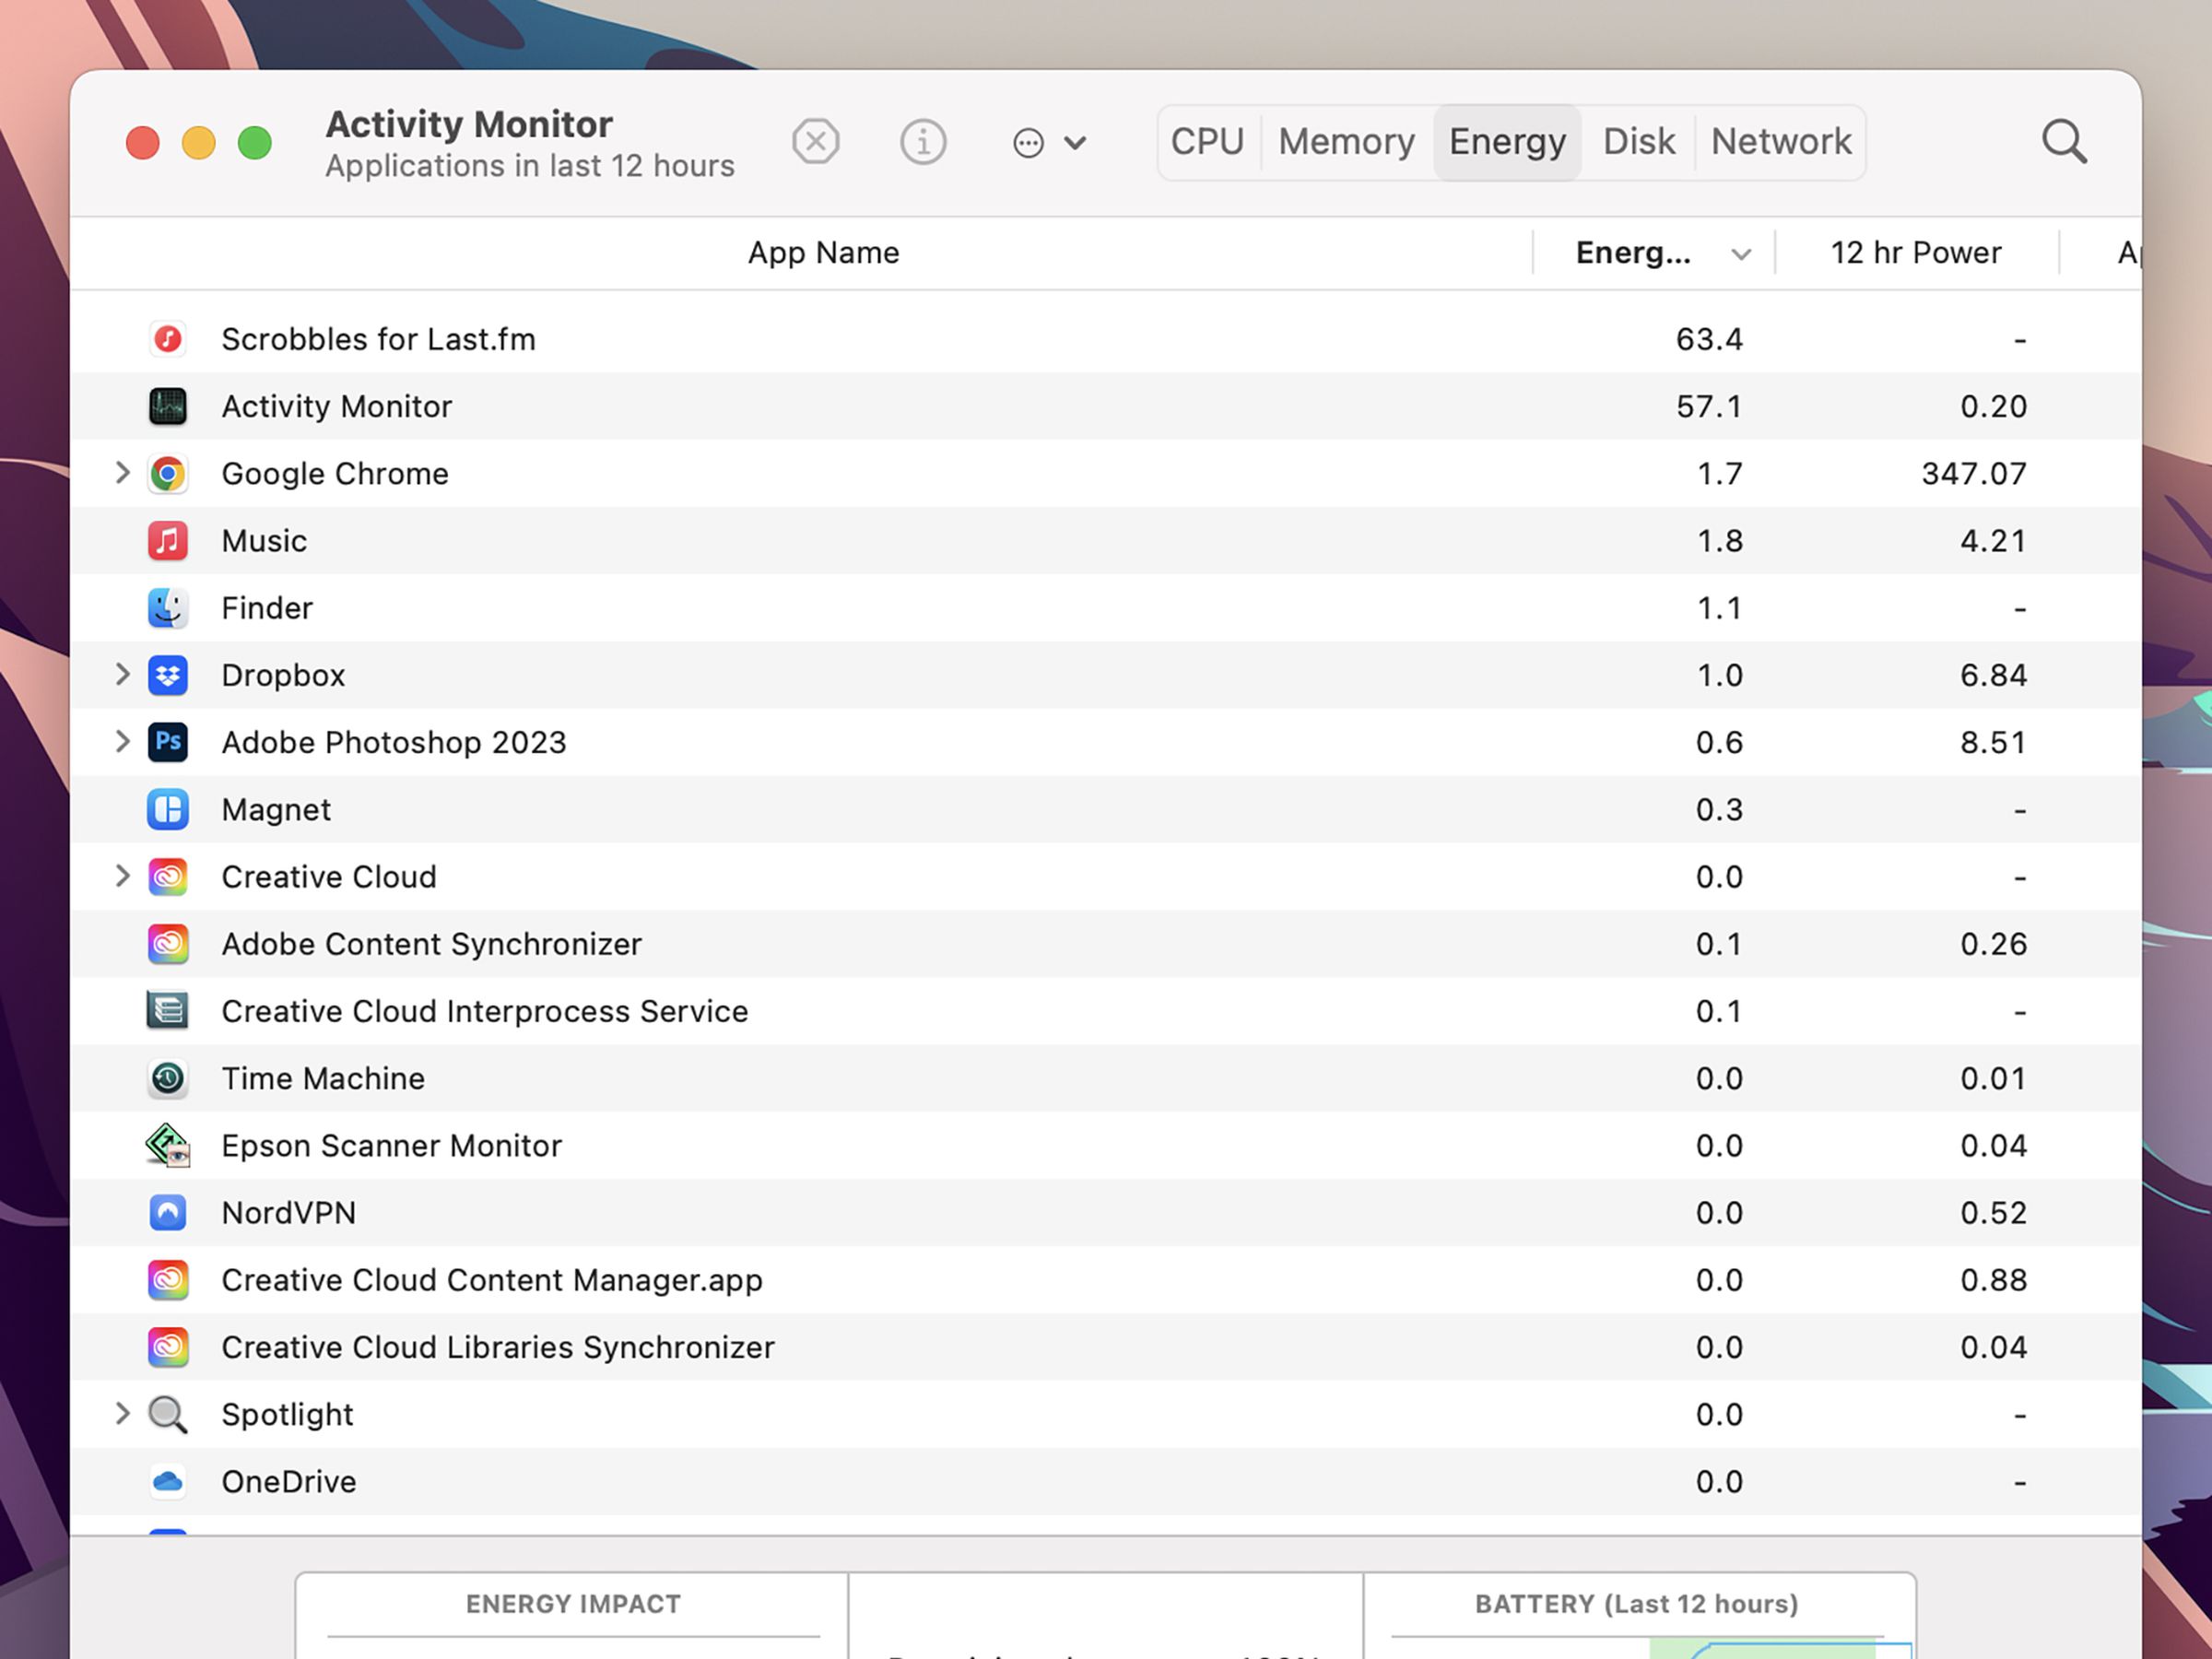 Activity monitor page on Mac, including app name, energy use, and power drain over last 12 hours.